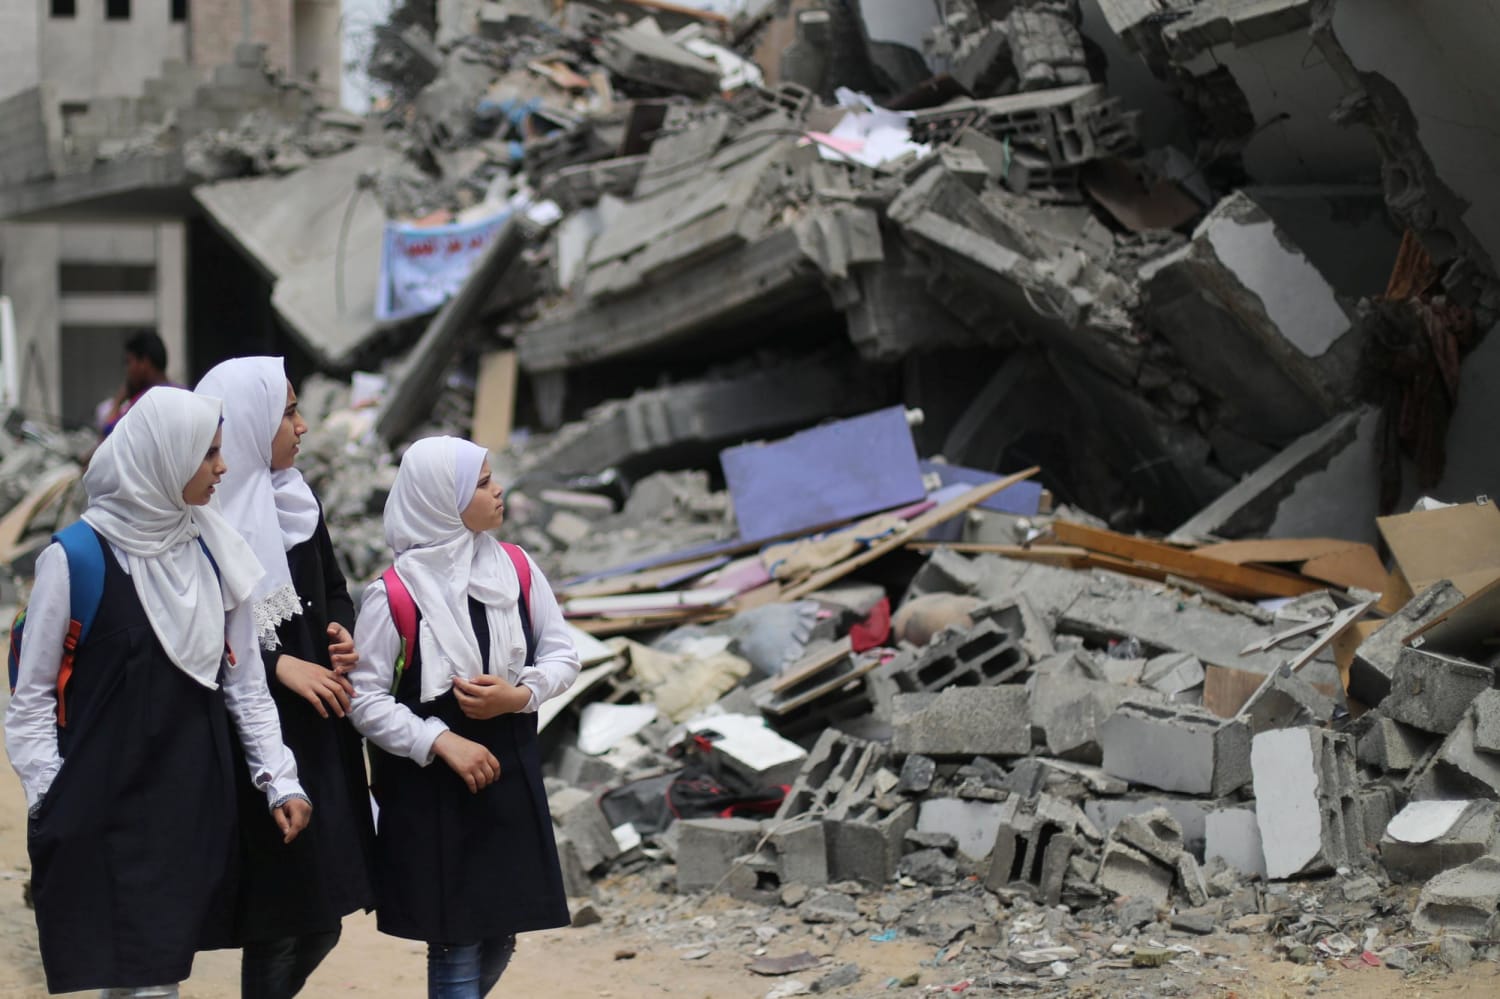 1 million Palestinians could go hungry in Gaza 'humanitarian catastrophe', warns UN